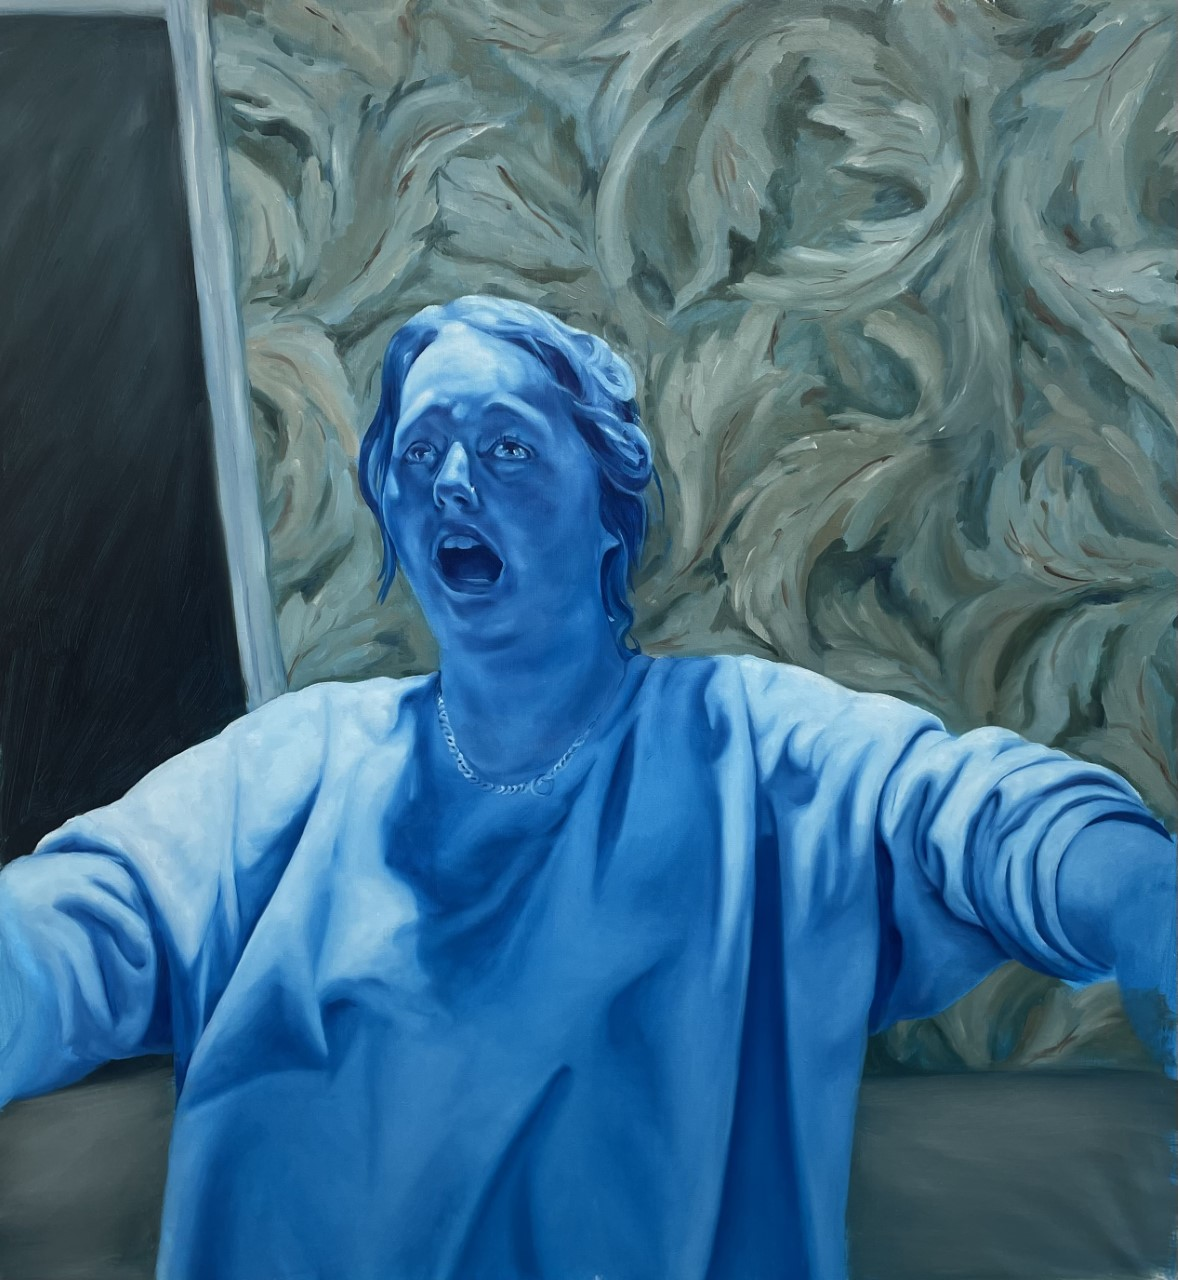 A painting of a blue woman in a t-shirt shouting against. a swirling, grey and brown background.